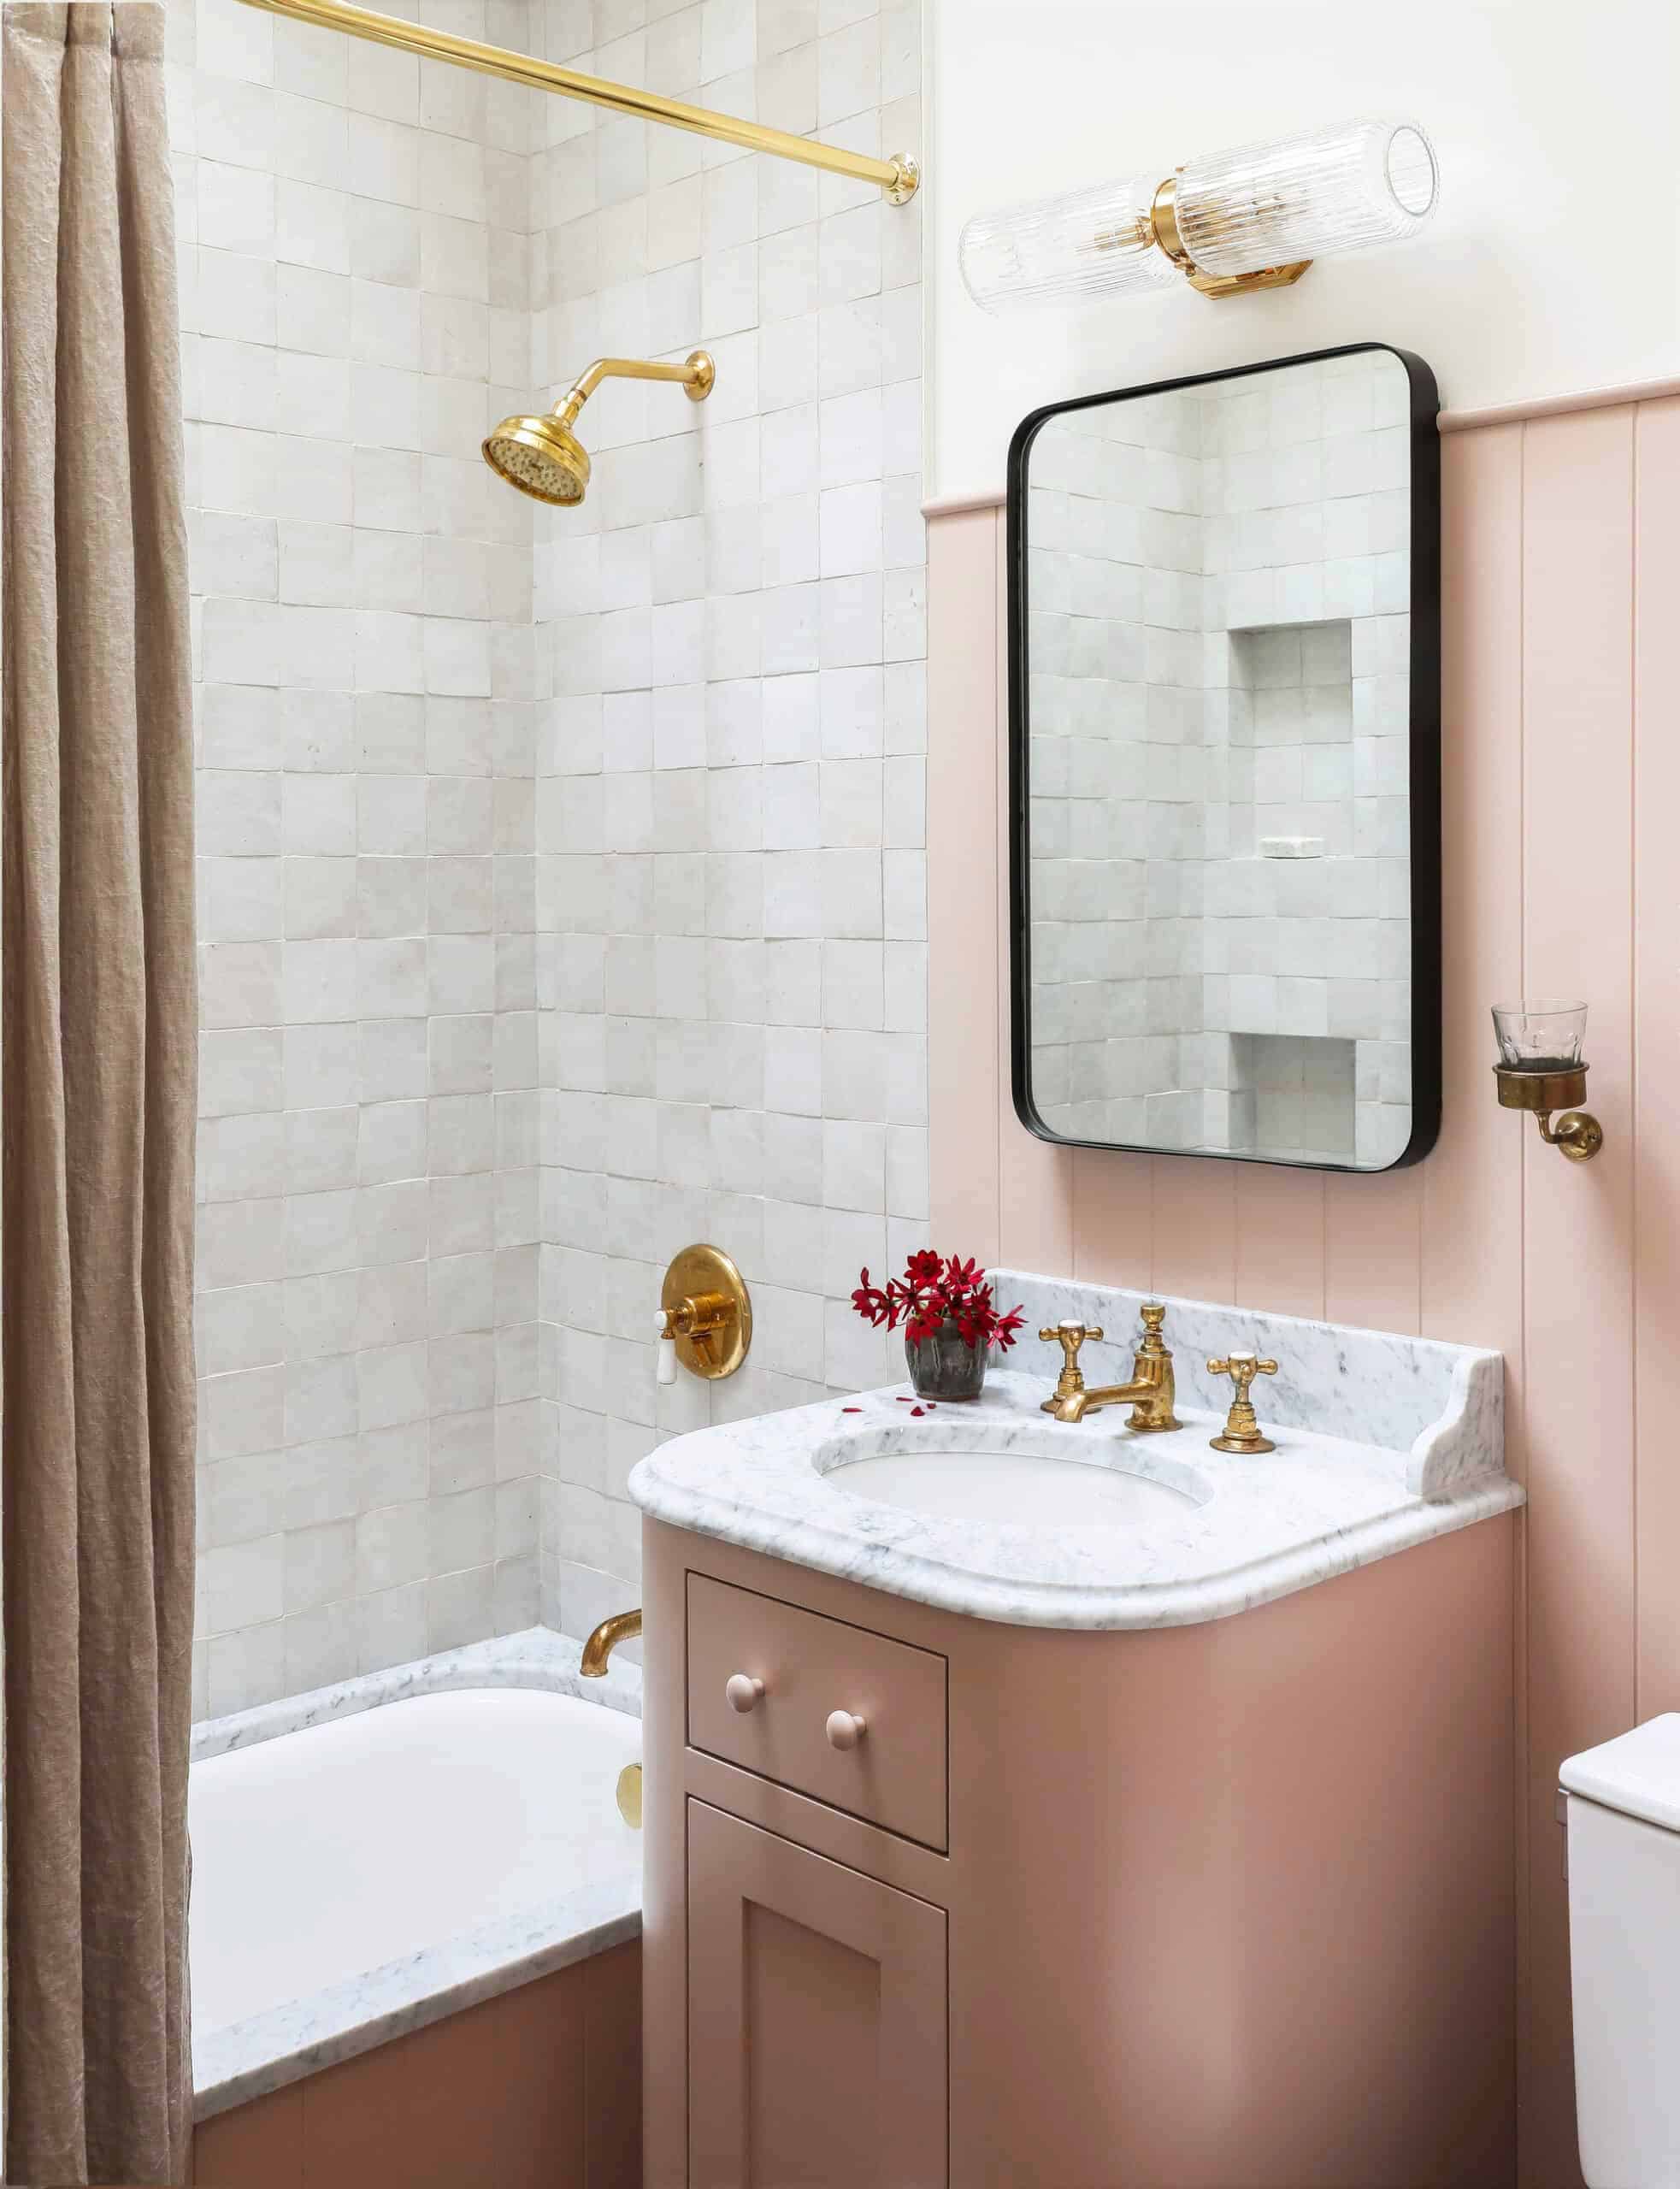 The Best 16 Small Bathroom Trends 2022 That Are Rule-Breaking